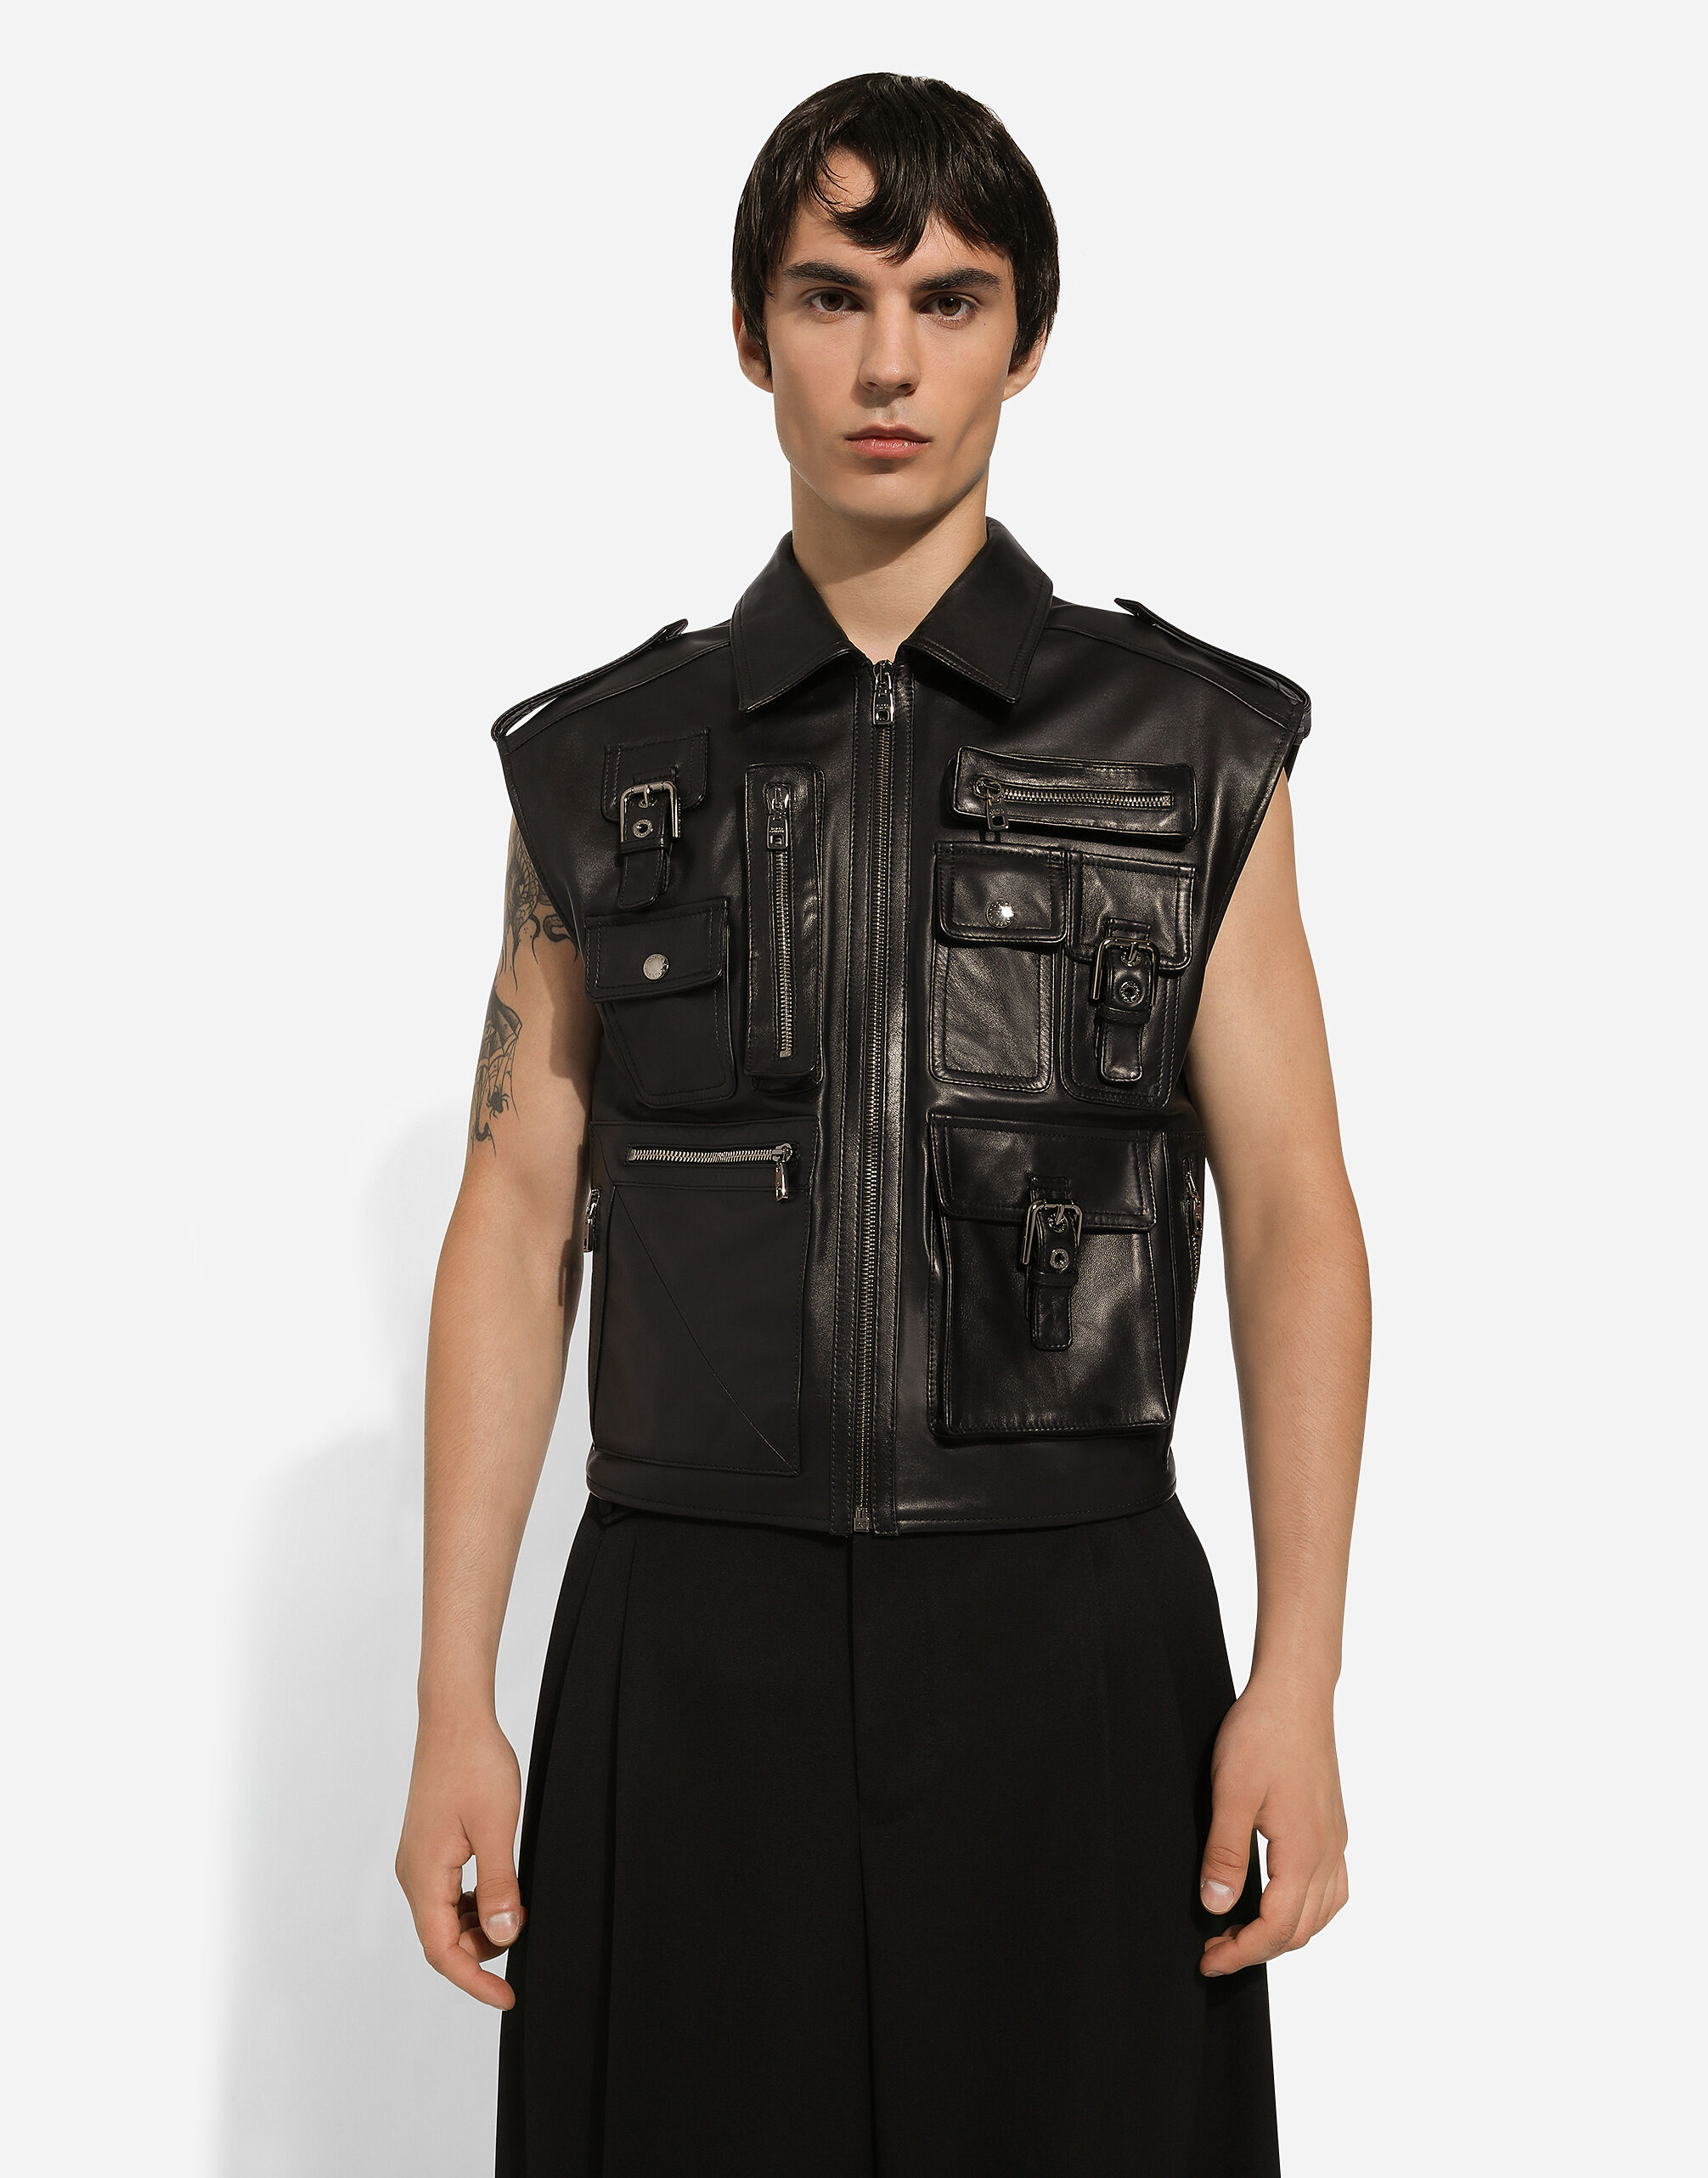 Leather vest with multiple pockets